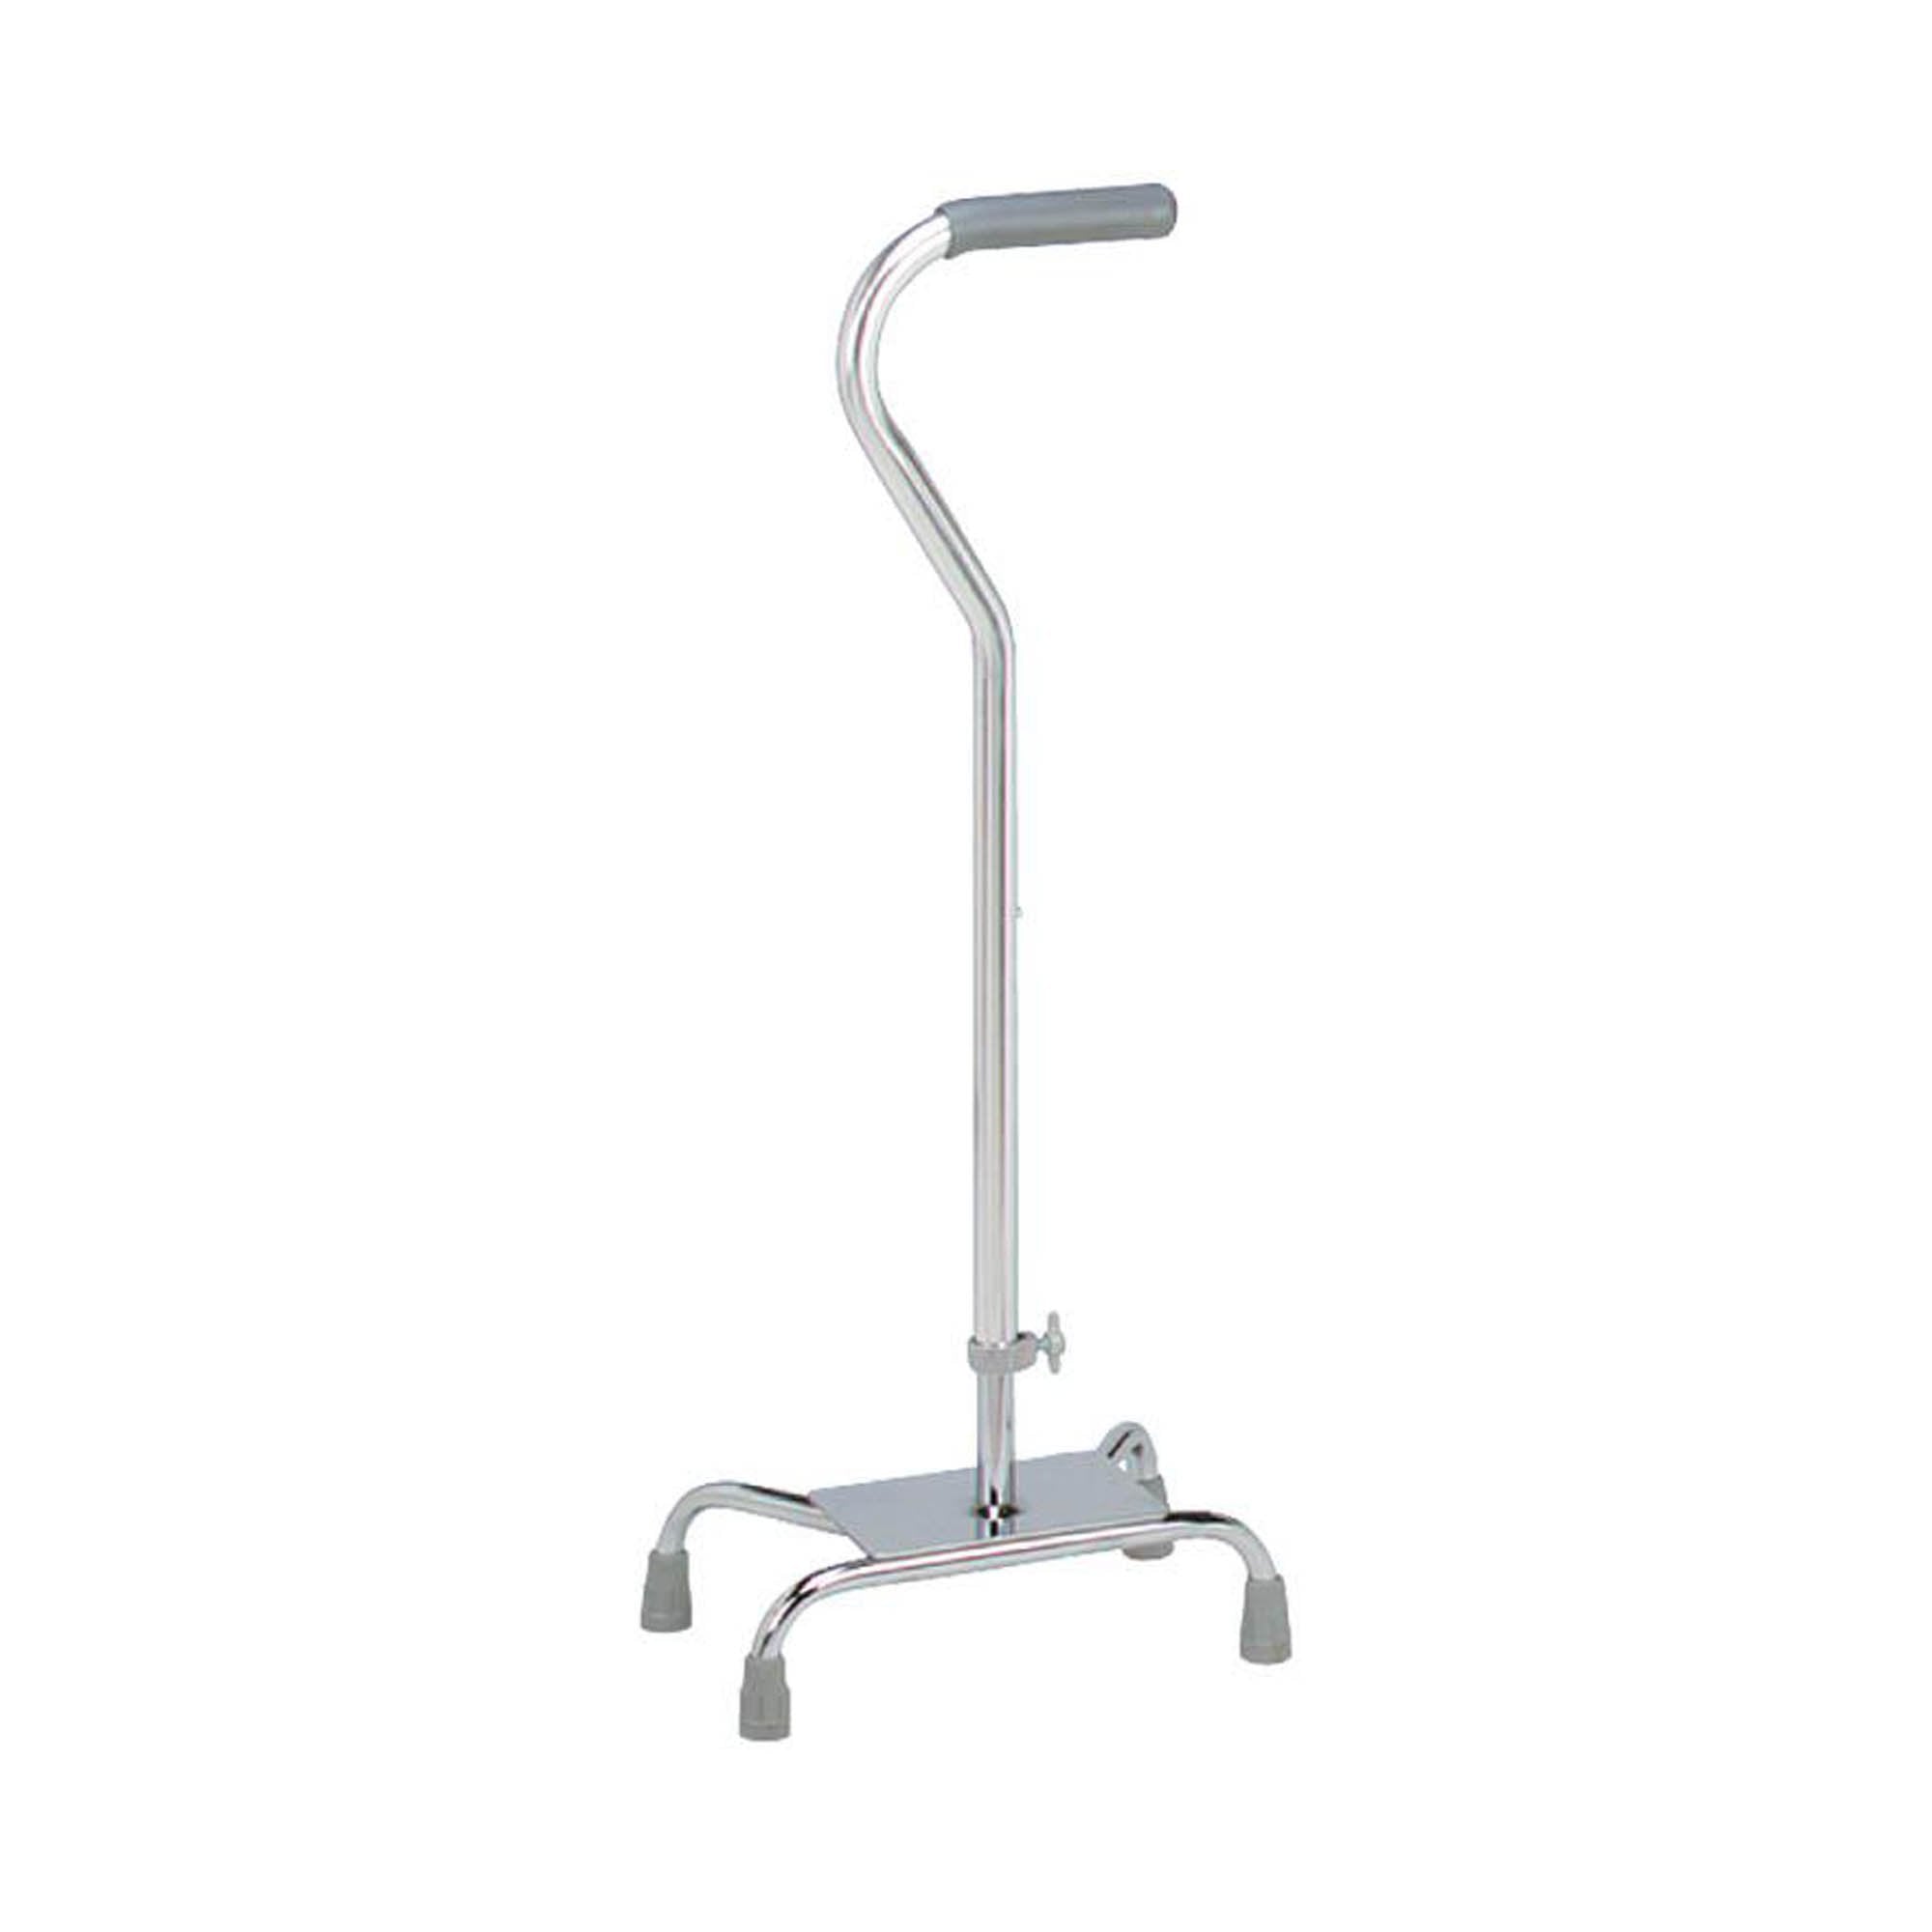 Large Base Quad Cane Carex® Aluminum 28 to 37 Inch Height Silver